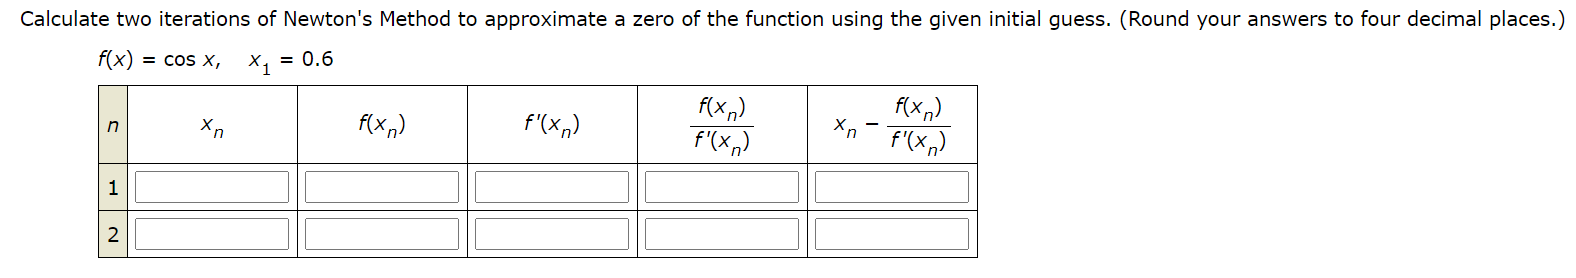 Calculate two iterations of Newton's Method to approximate a zero of the function using the given initial guess. (Round your answers to four decimal places.
f(x) = cos x,
X, = 0.6
f(x,)
f'(x,)
f(x,)
f'(x,)
f(x,)
f'(xn)
1
2
